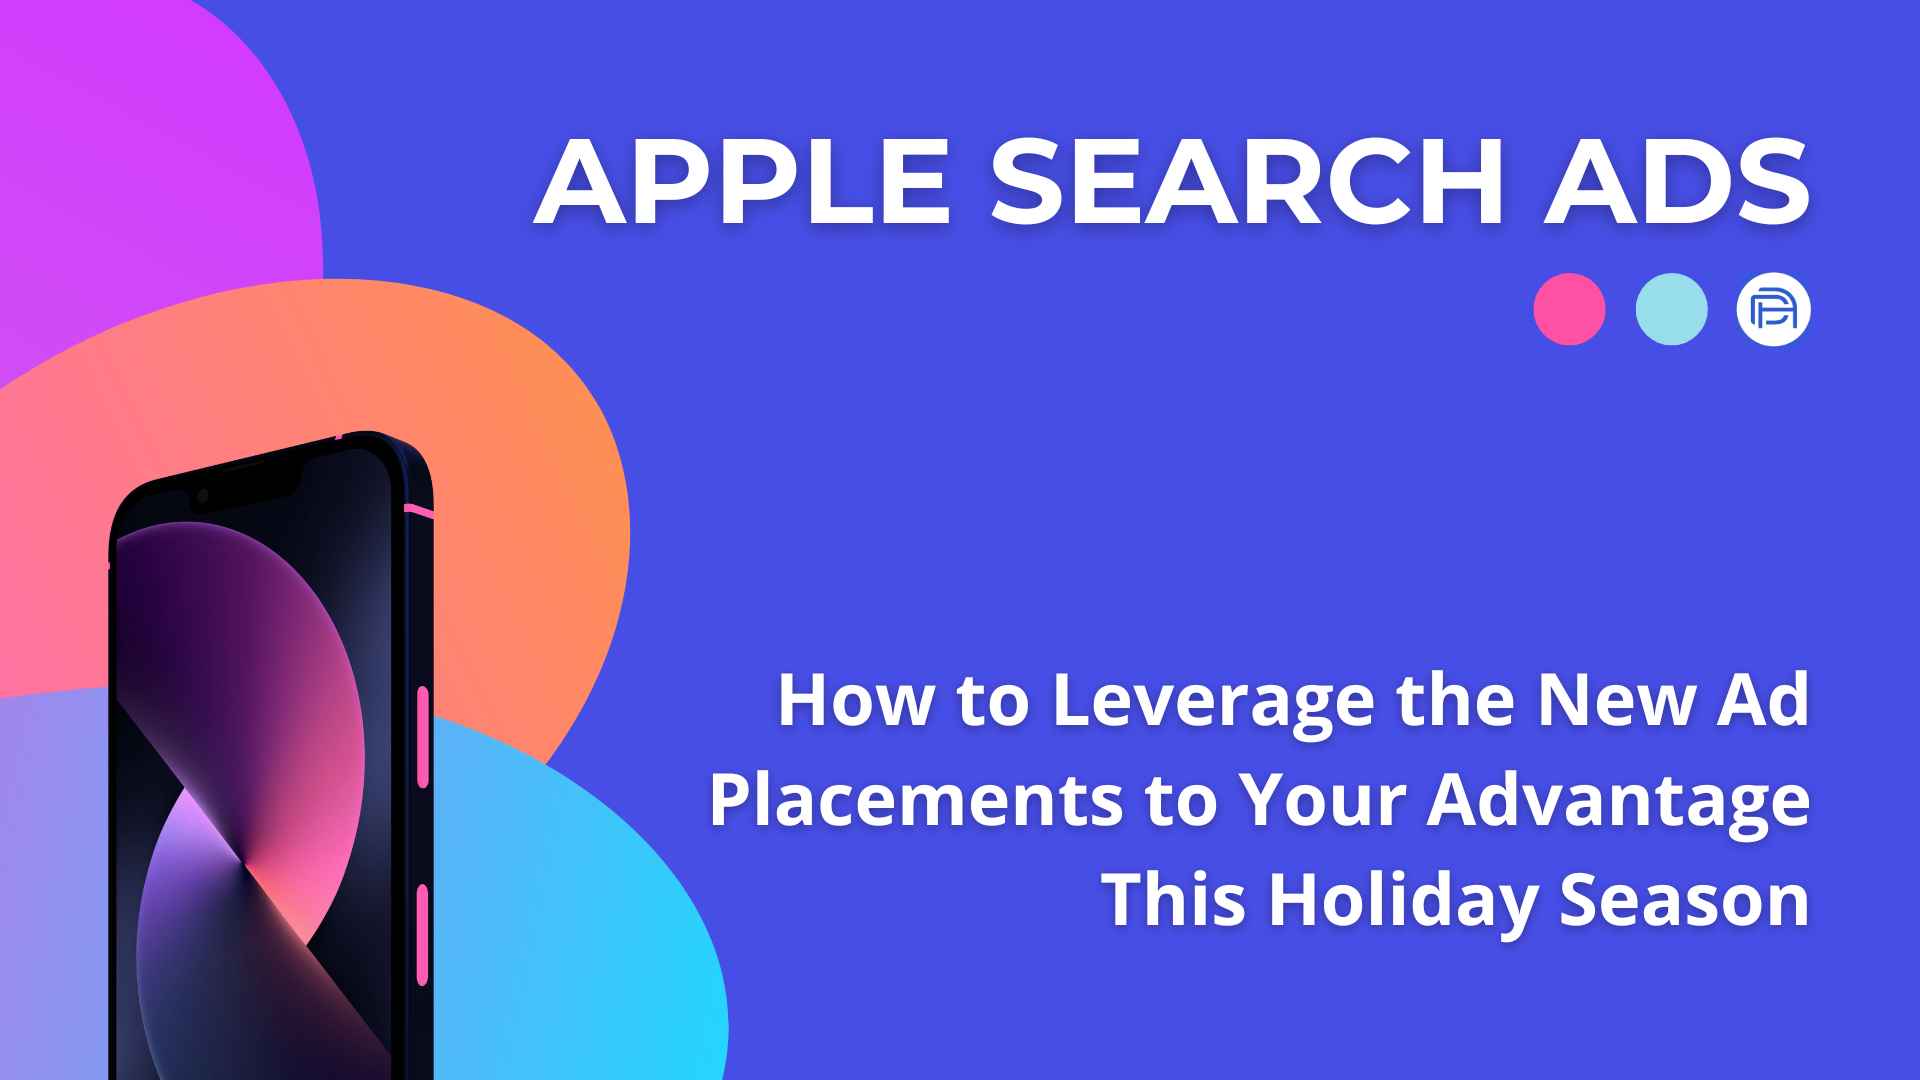 Apple Search Ads (ASA): How to Leverage the New Ad Placements to Your Advantage this Holiday Season